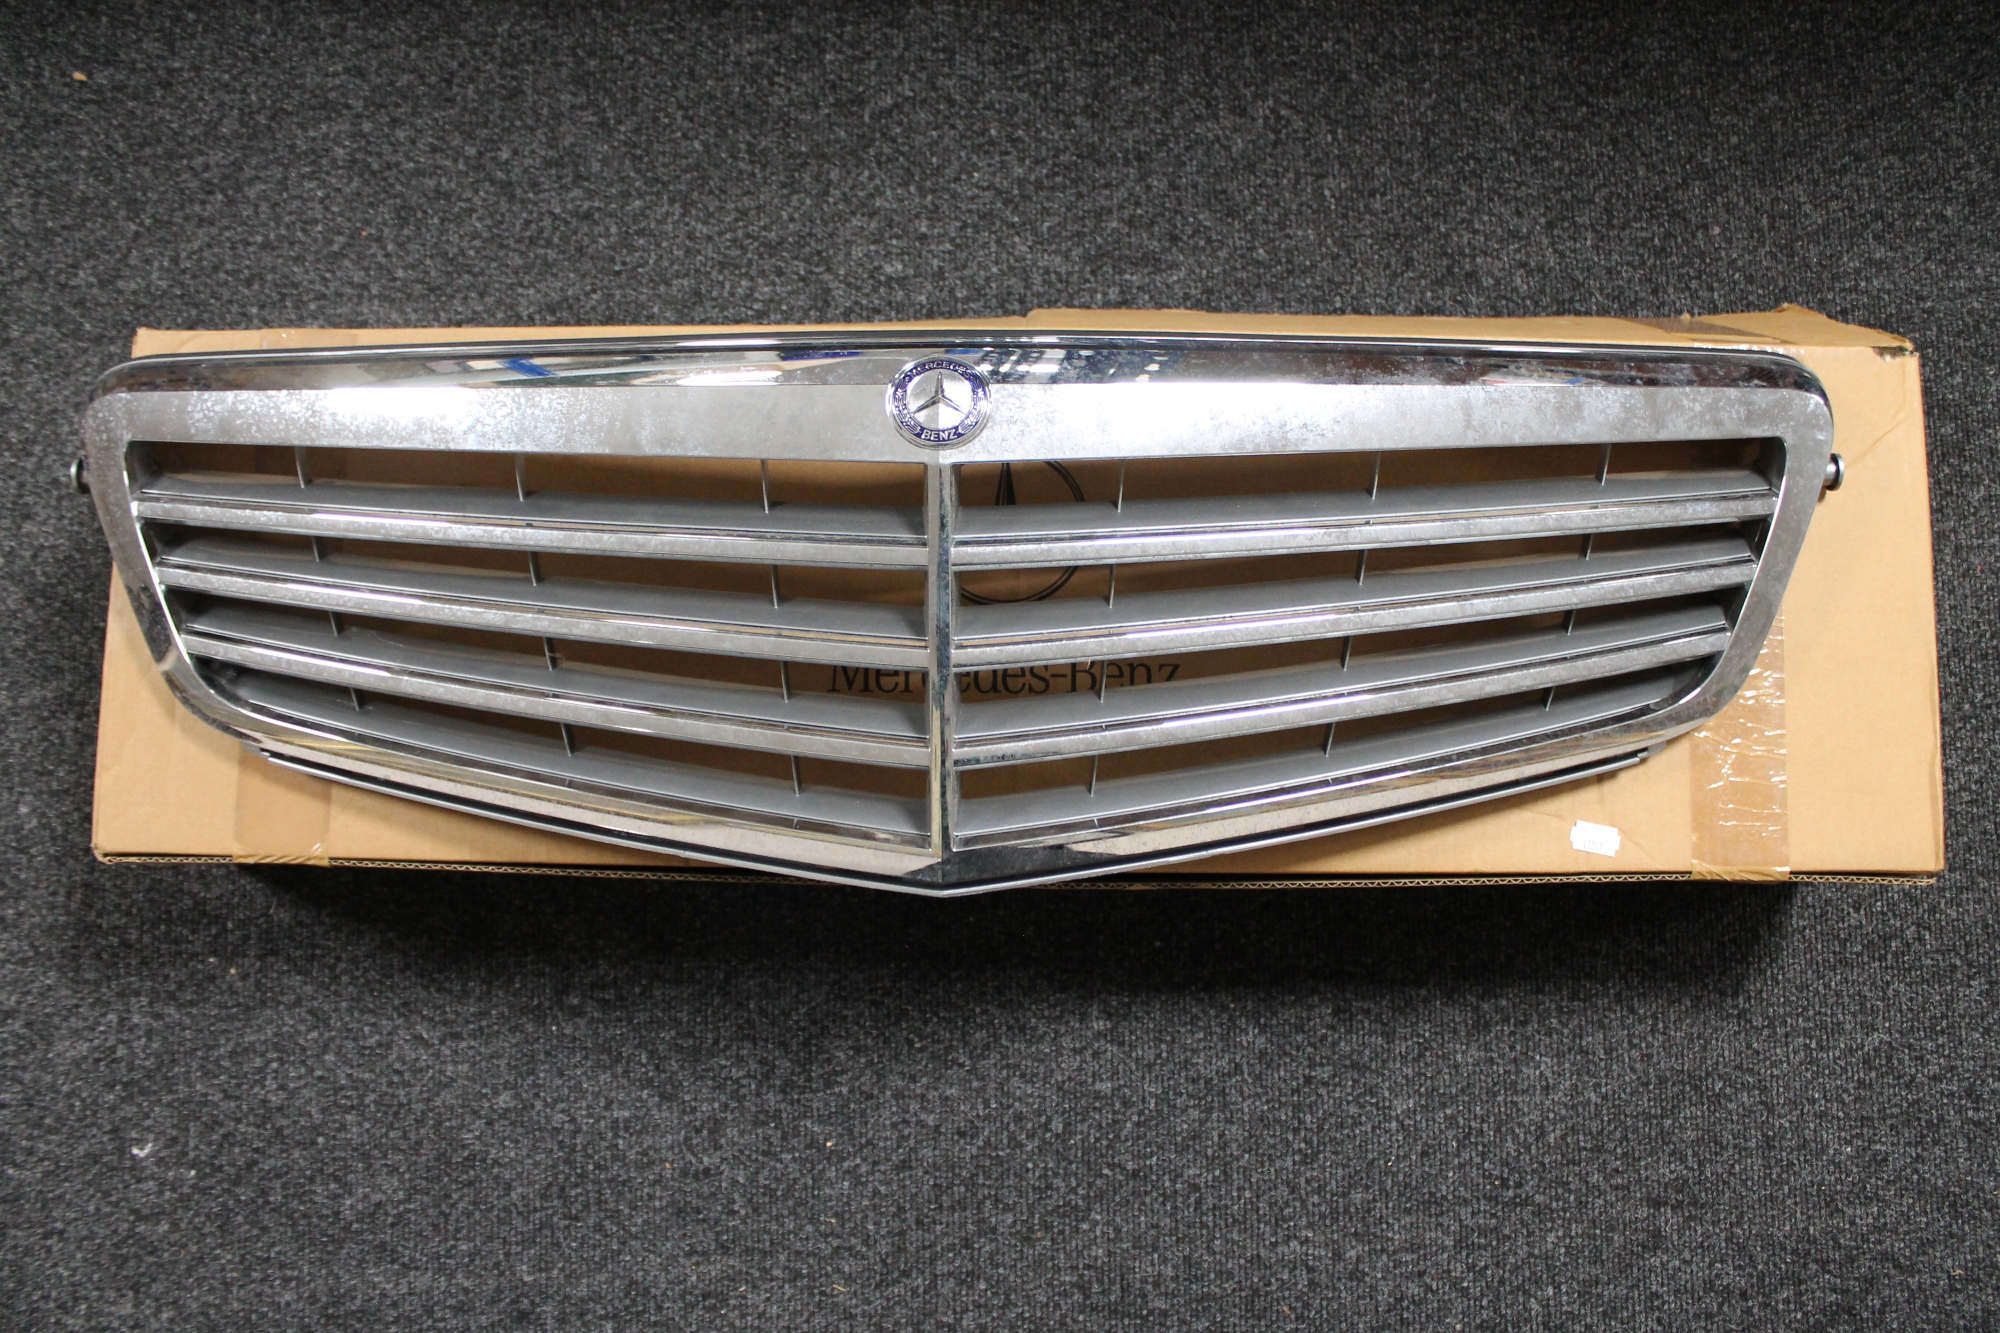 A boxed Mercedes Benz W204 front grill